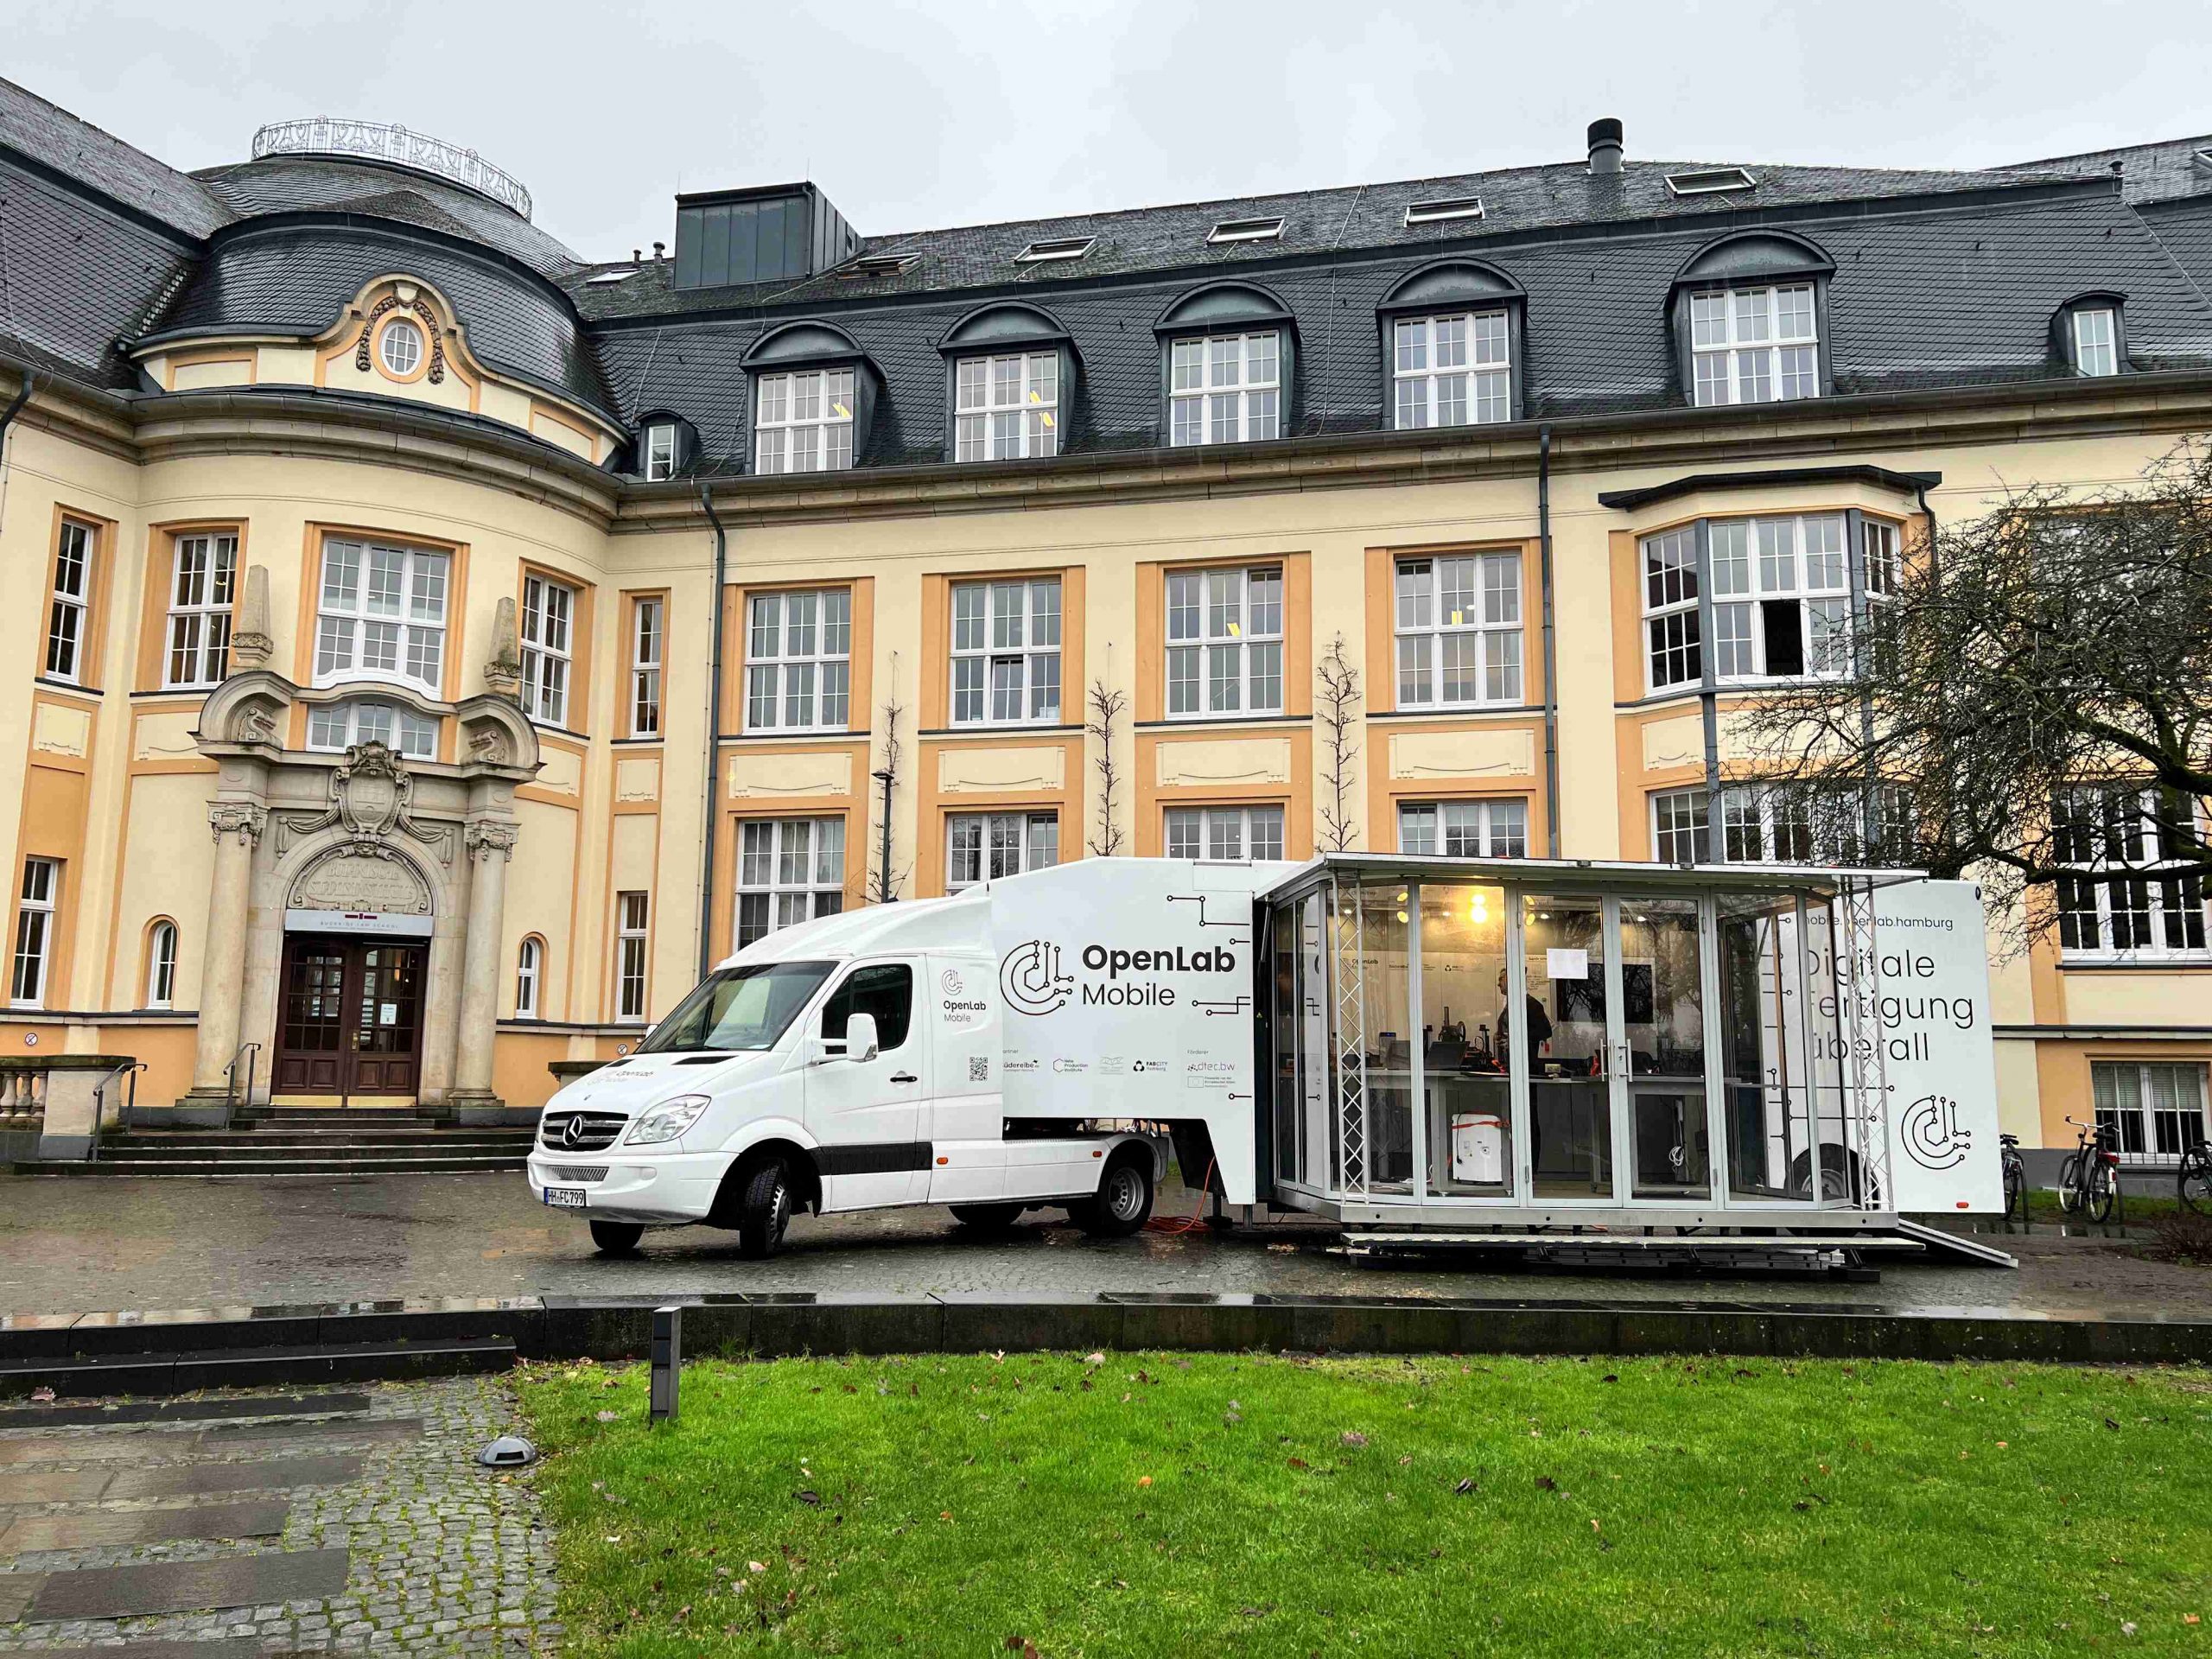 Read more about the article The OpenLab Mobile at Bucerius Law School focussing on the topic: Legal Issues of Open Source Hardware.